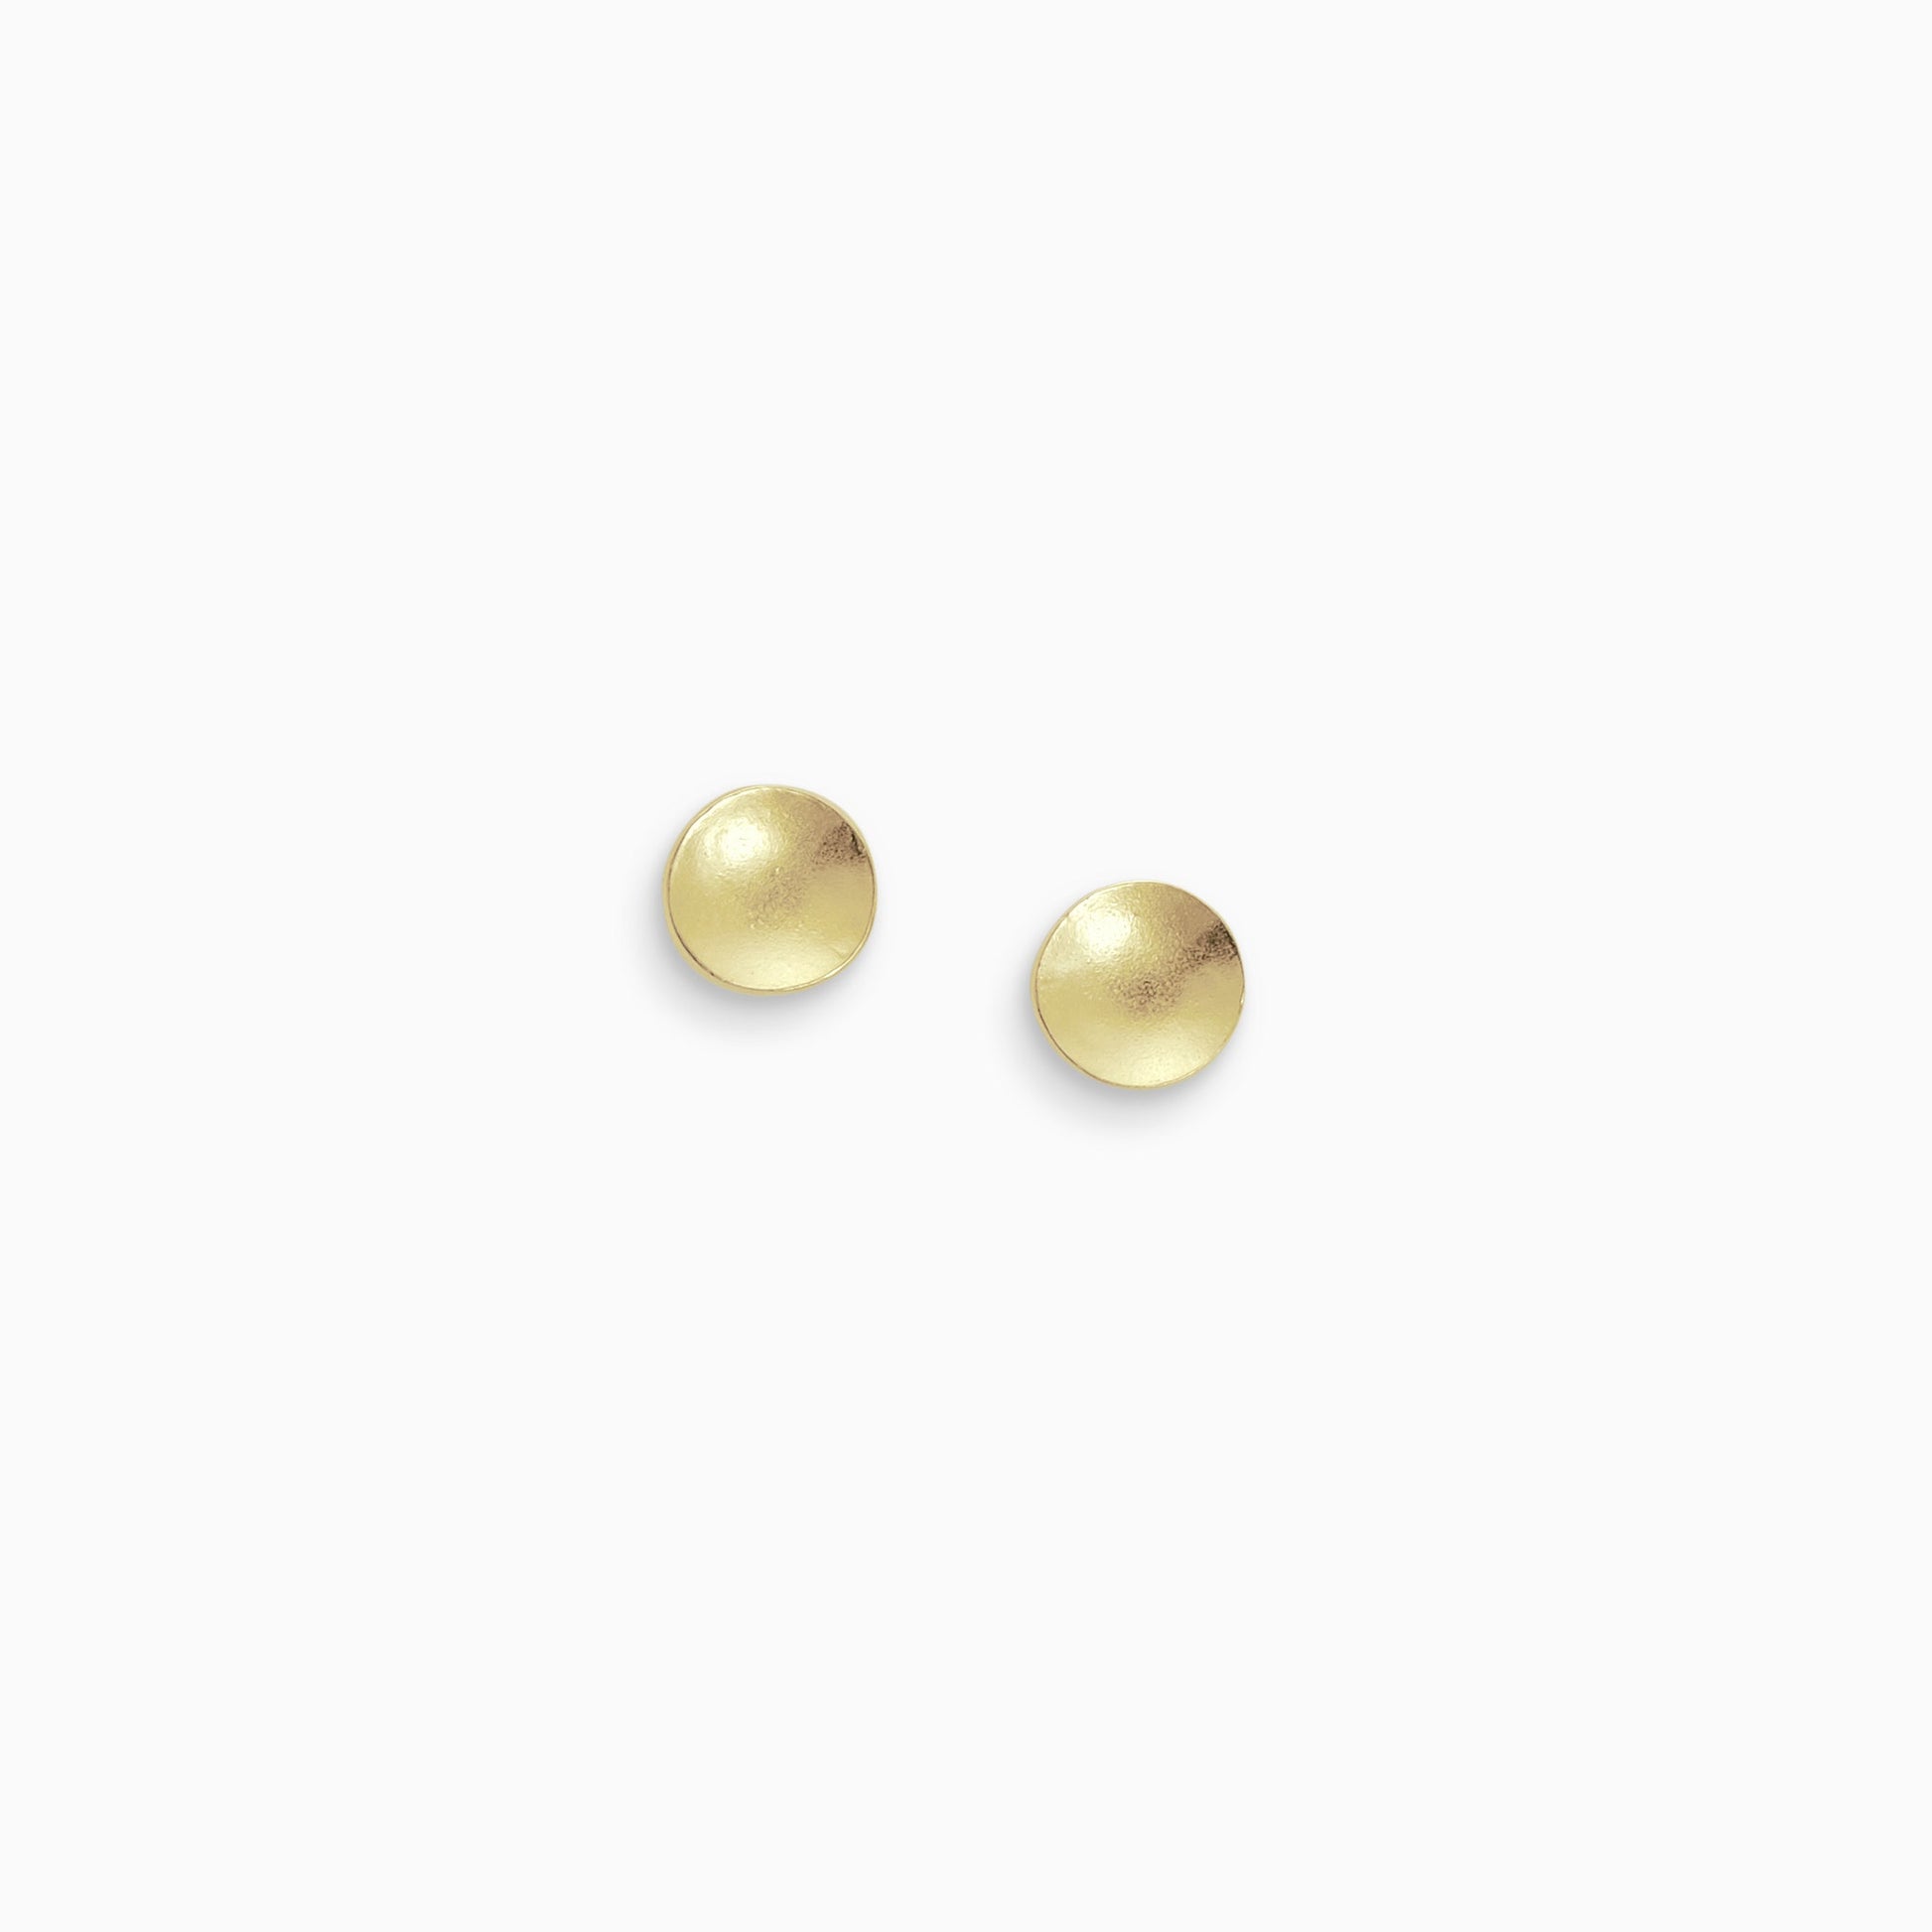 18ct Fairtrade yellow gold round 8mm diameter concave stud earrings. Depth 2mm